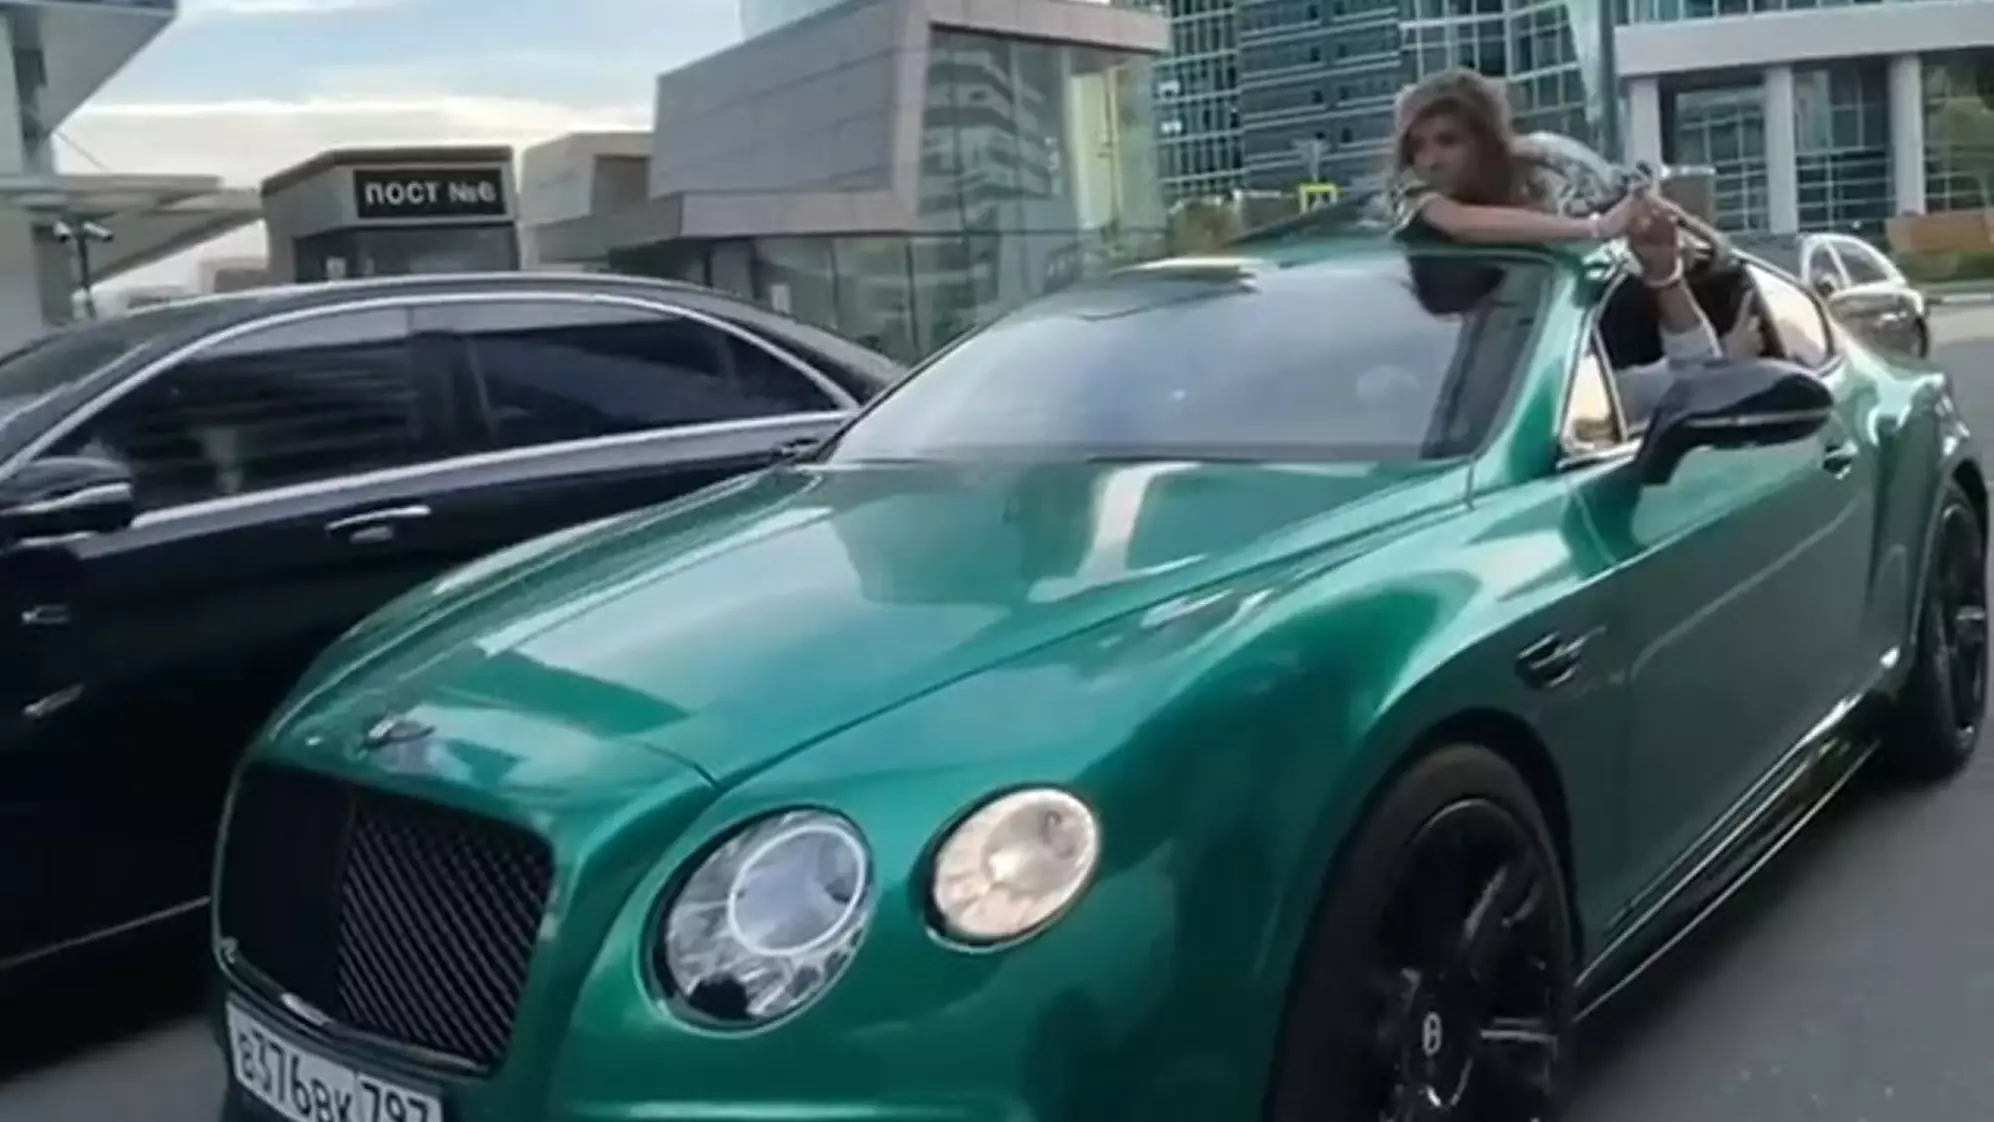 Influencer Drives With Girlfriend On Roof Handcuffed To Him In 'Trust Test' Stunt